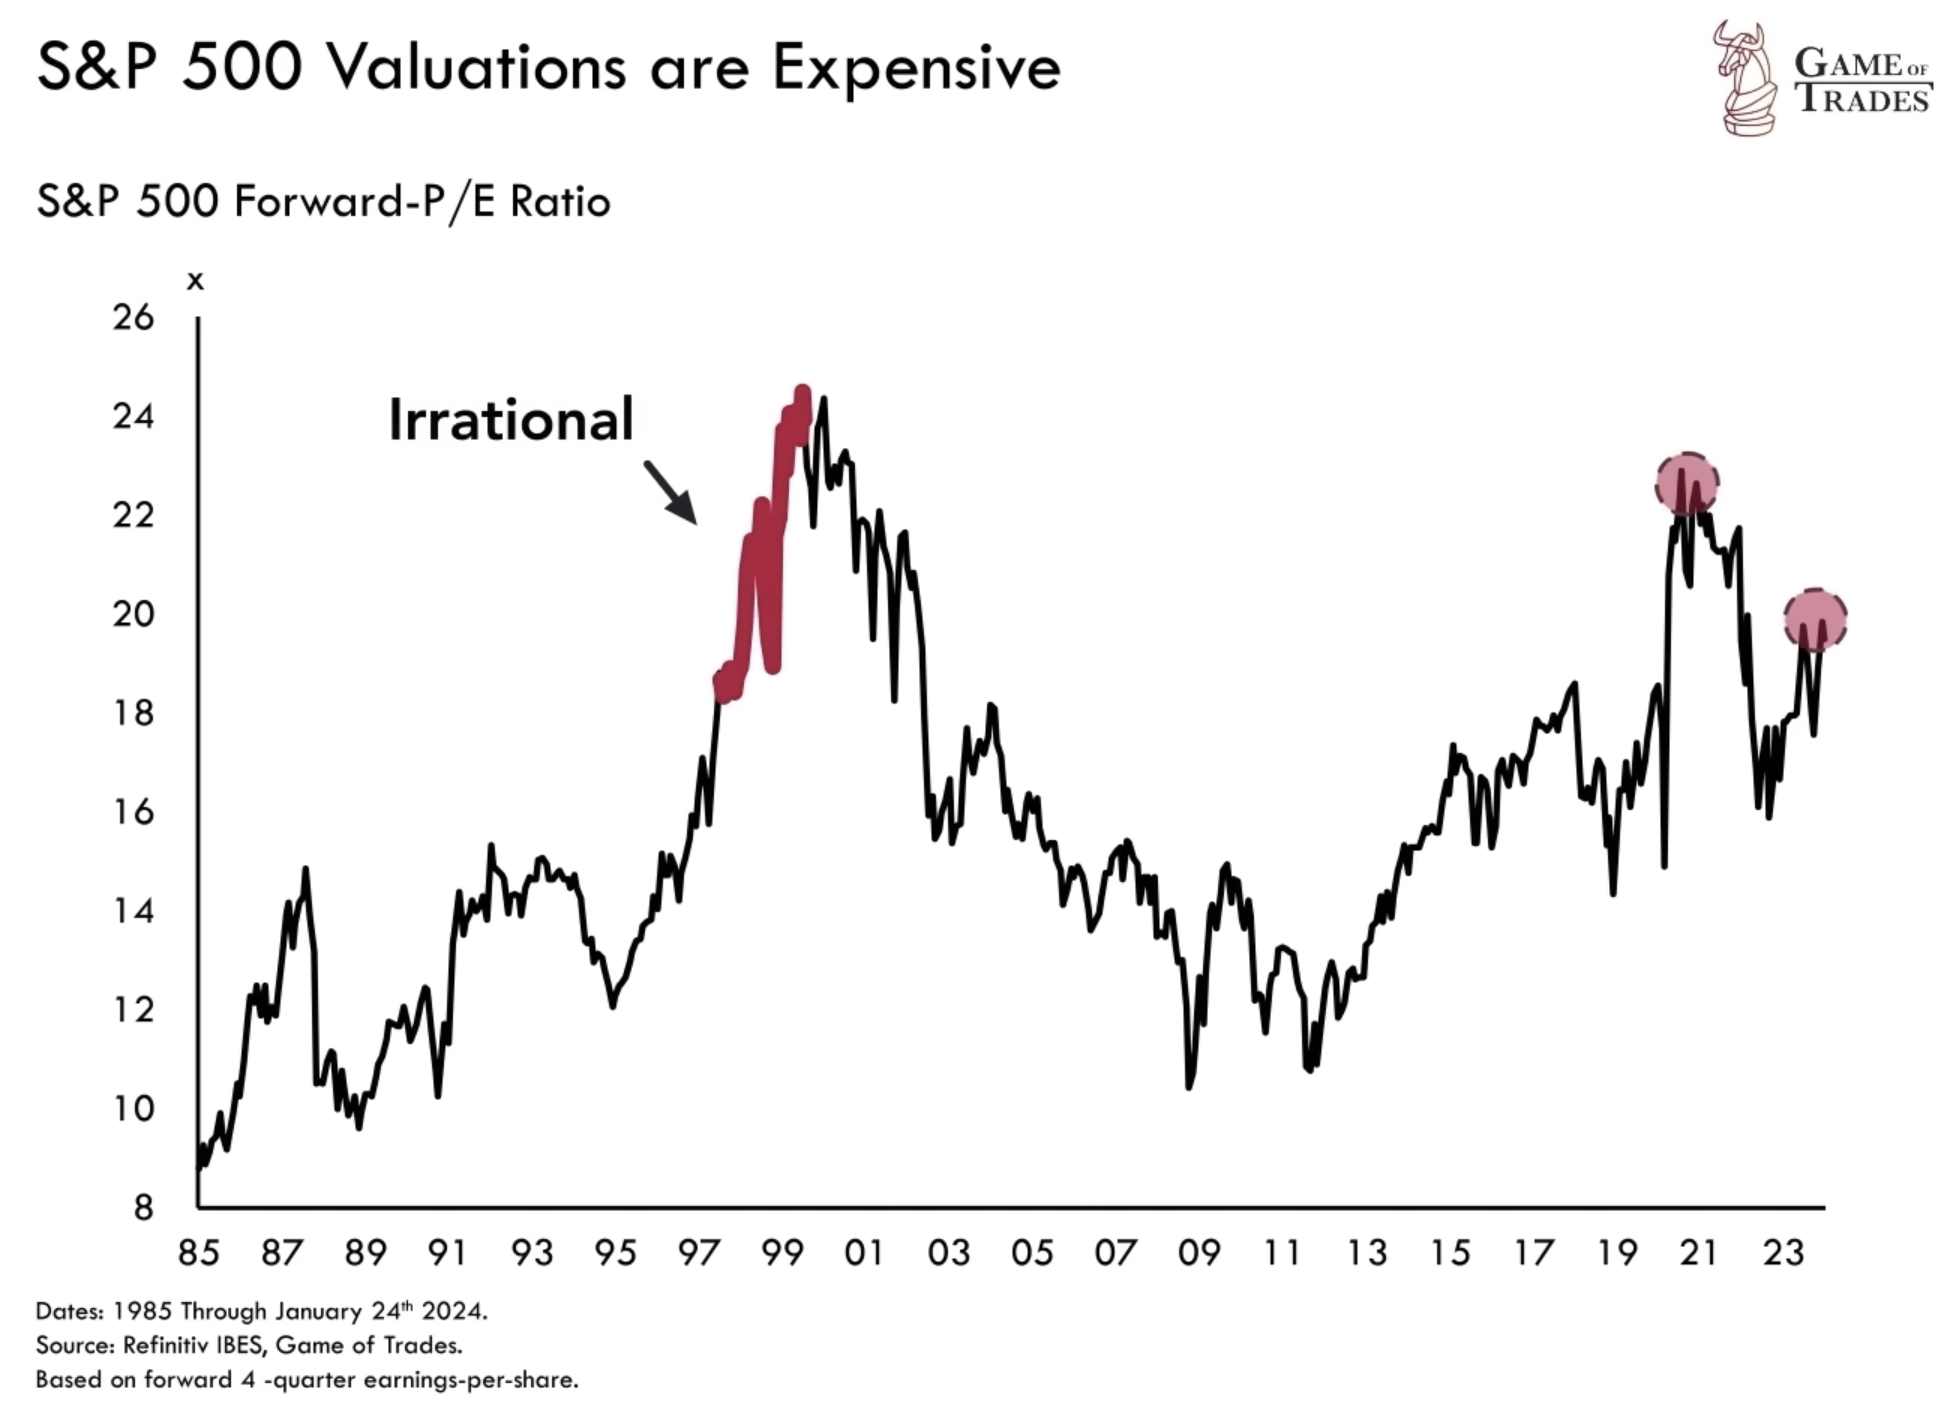 S&P 500 Valuations data